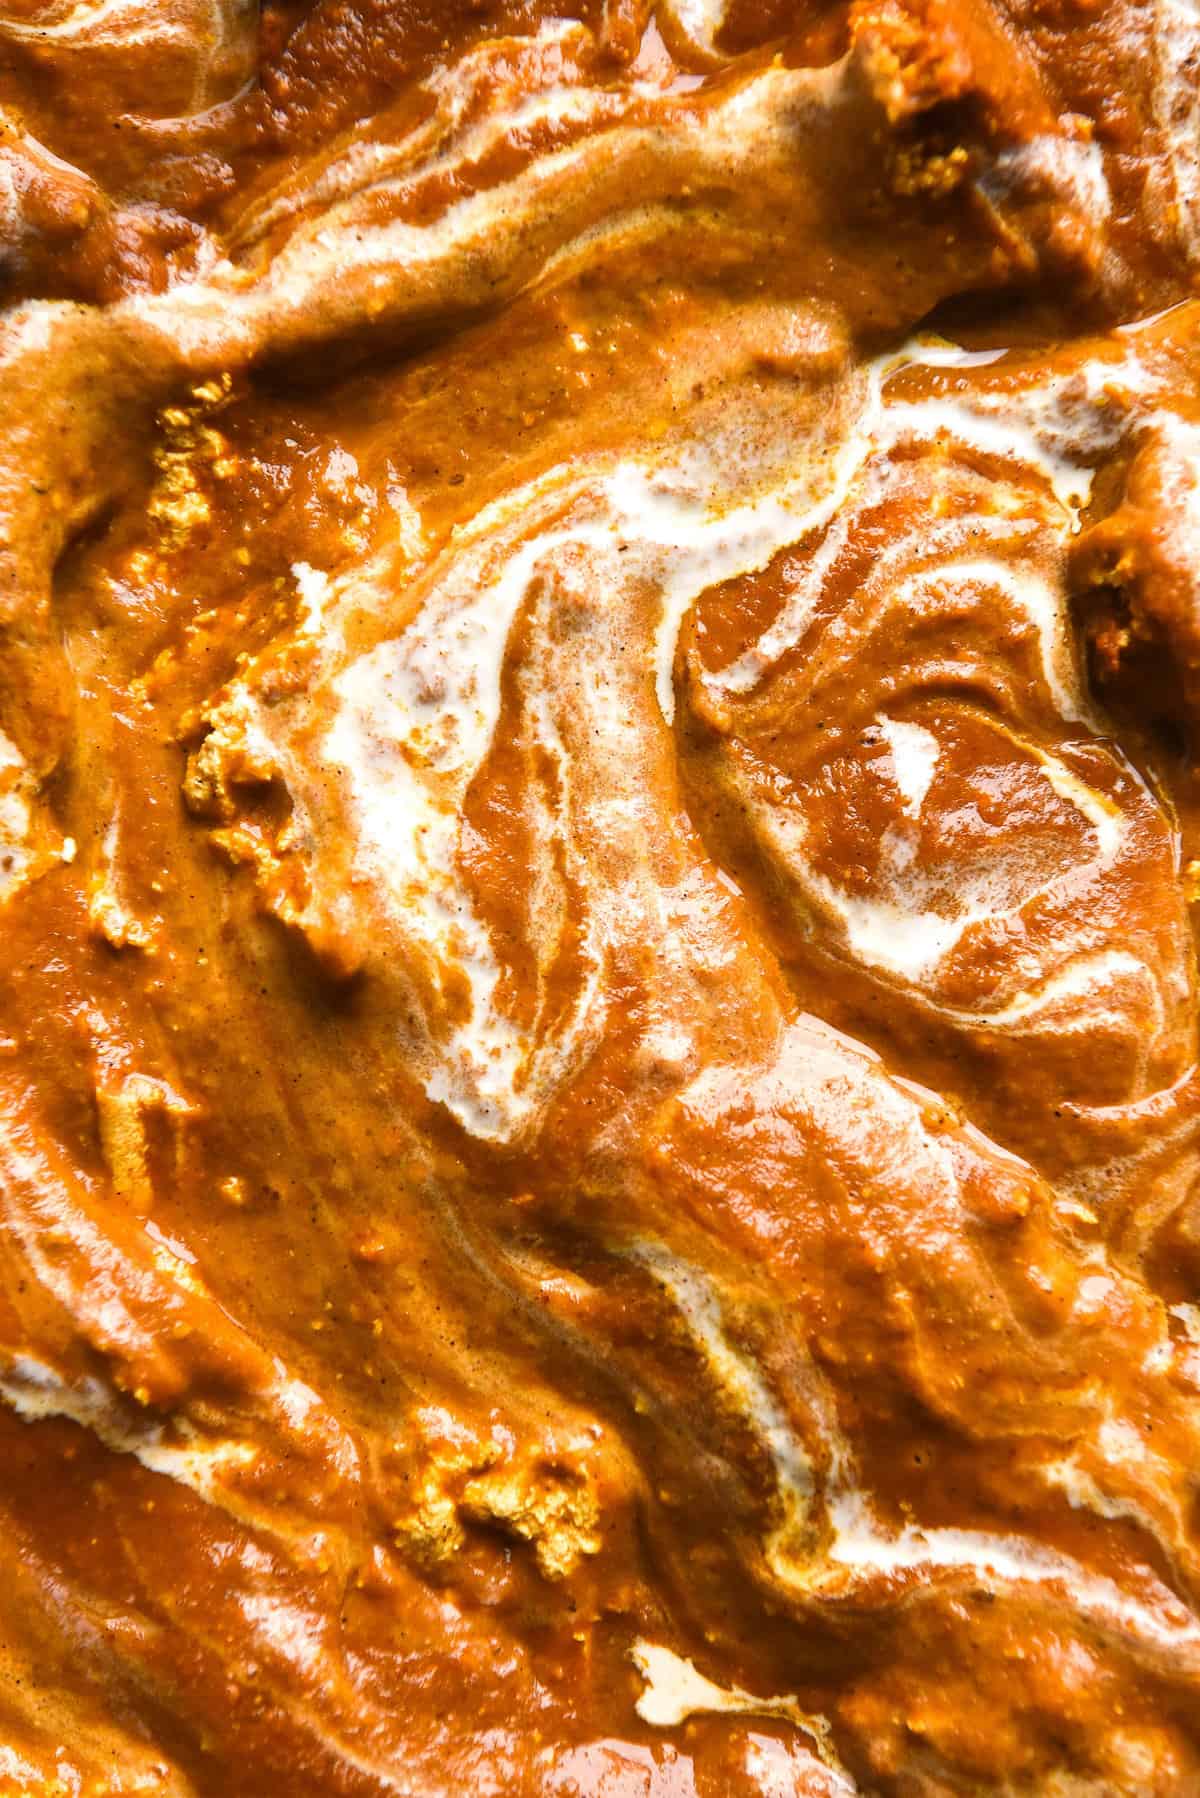 A macro close up photo of the top of a FODMAP friendly paneer curry. The curry is a deep orange and has been swirled with cream, creating a marbled effect